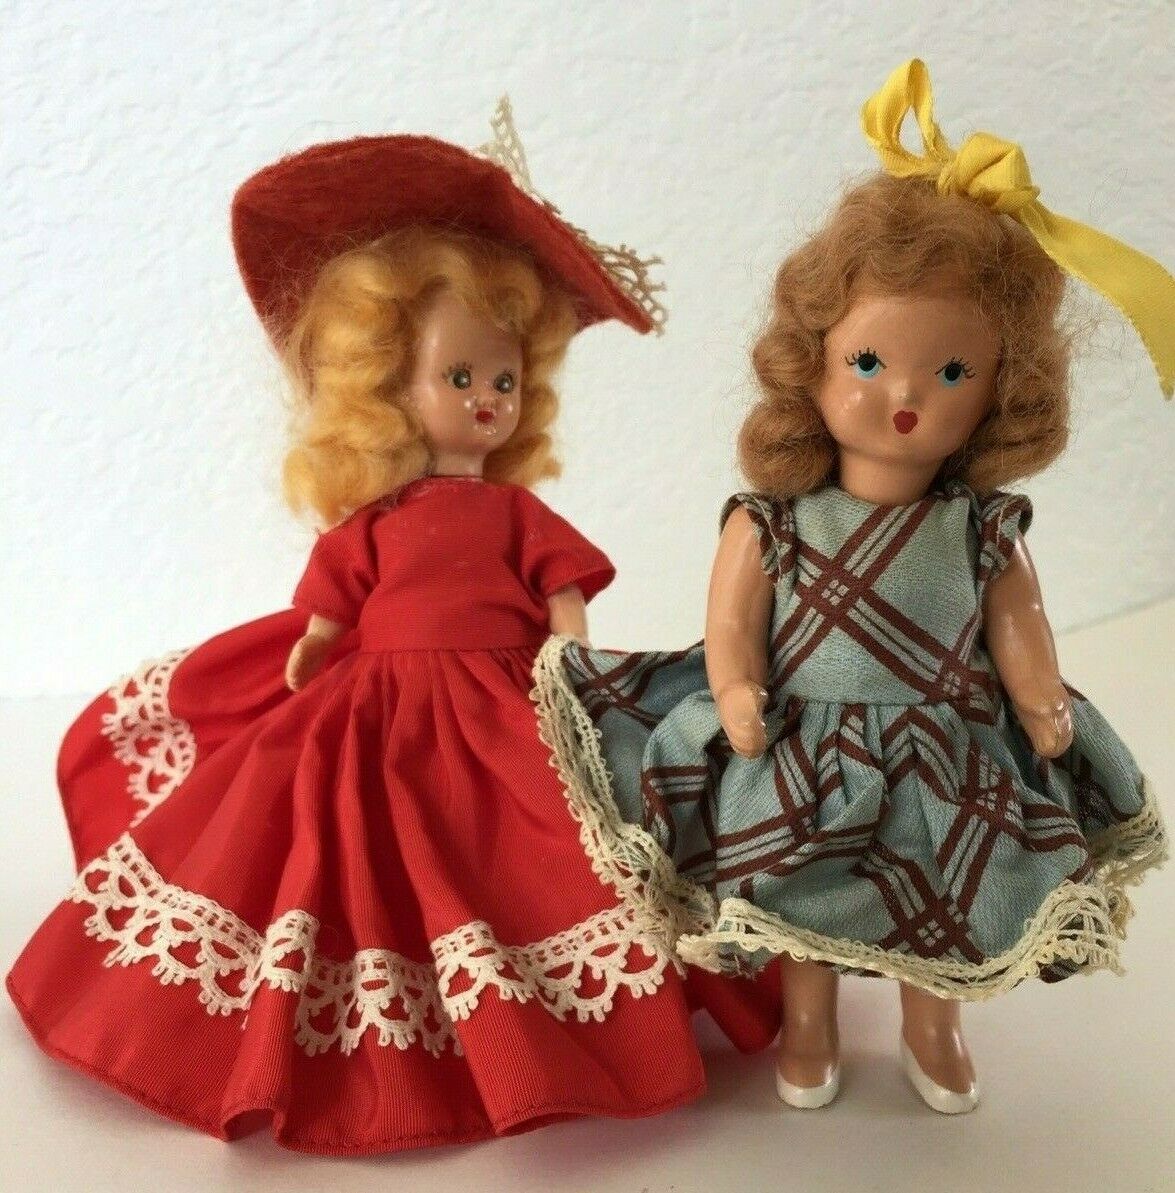 Unmarked Vintage Composition Doll 5" & Plastic Doll 5"